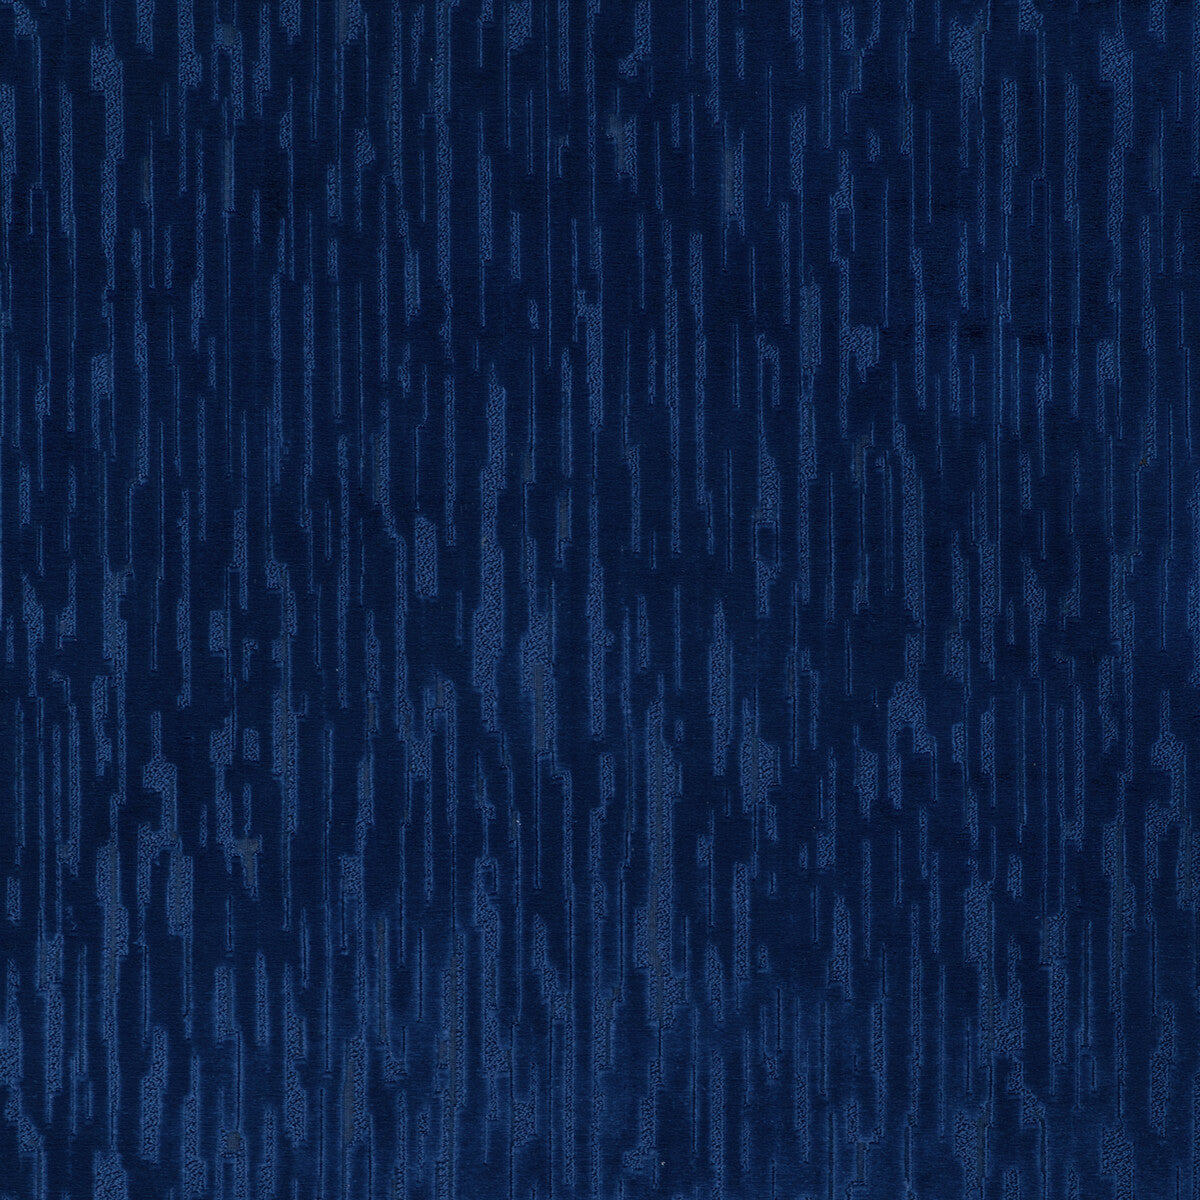 Rendezvous fabric in lapis color - pattern 37283.50.0 - by Kravet Contract in the Happy Hour collection